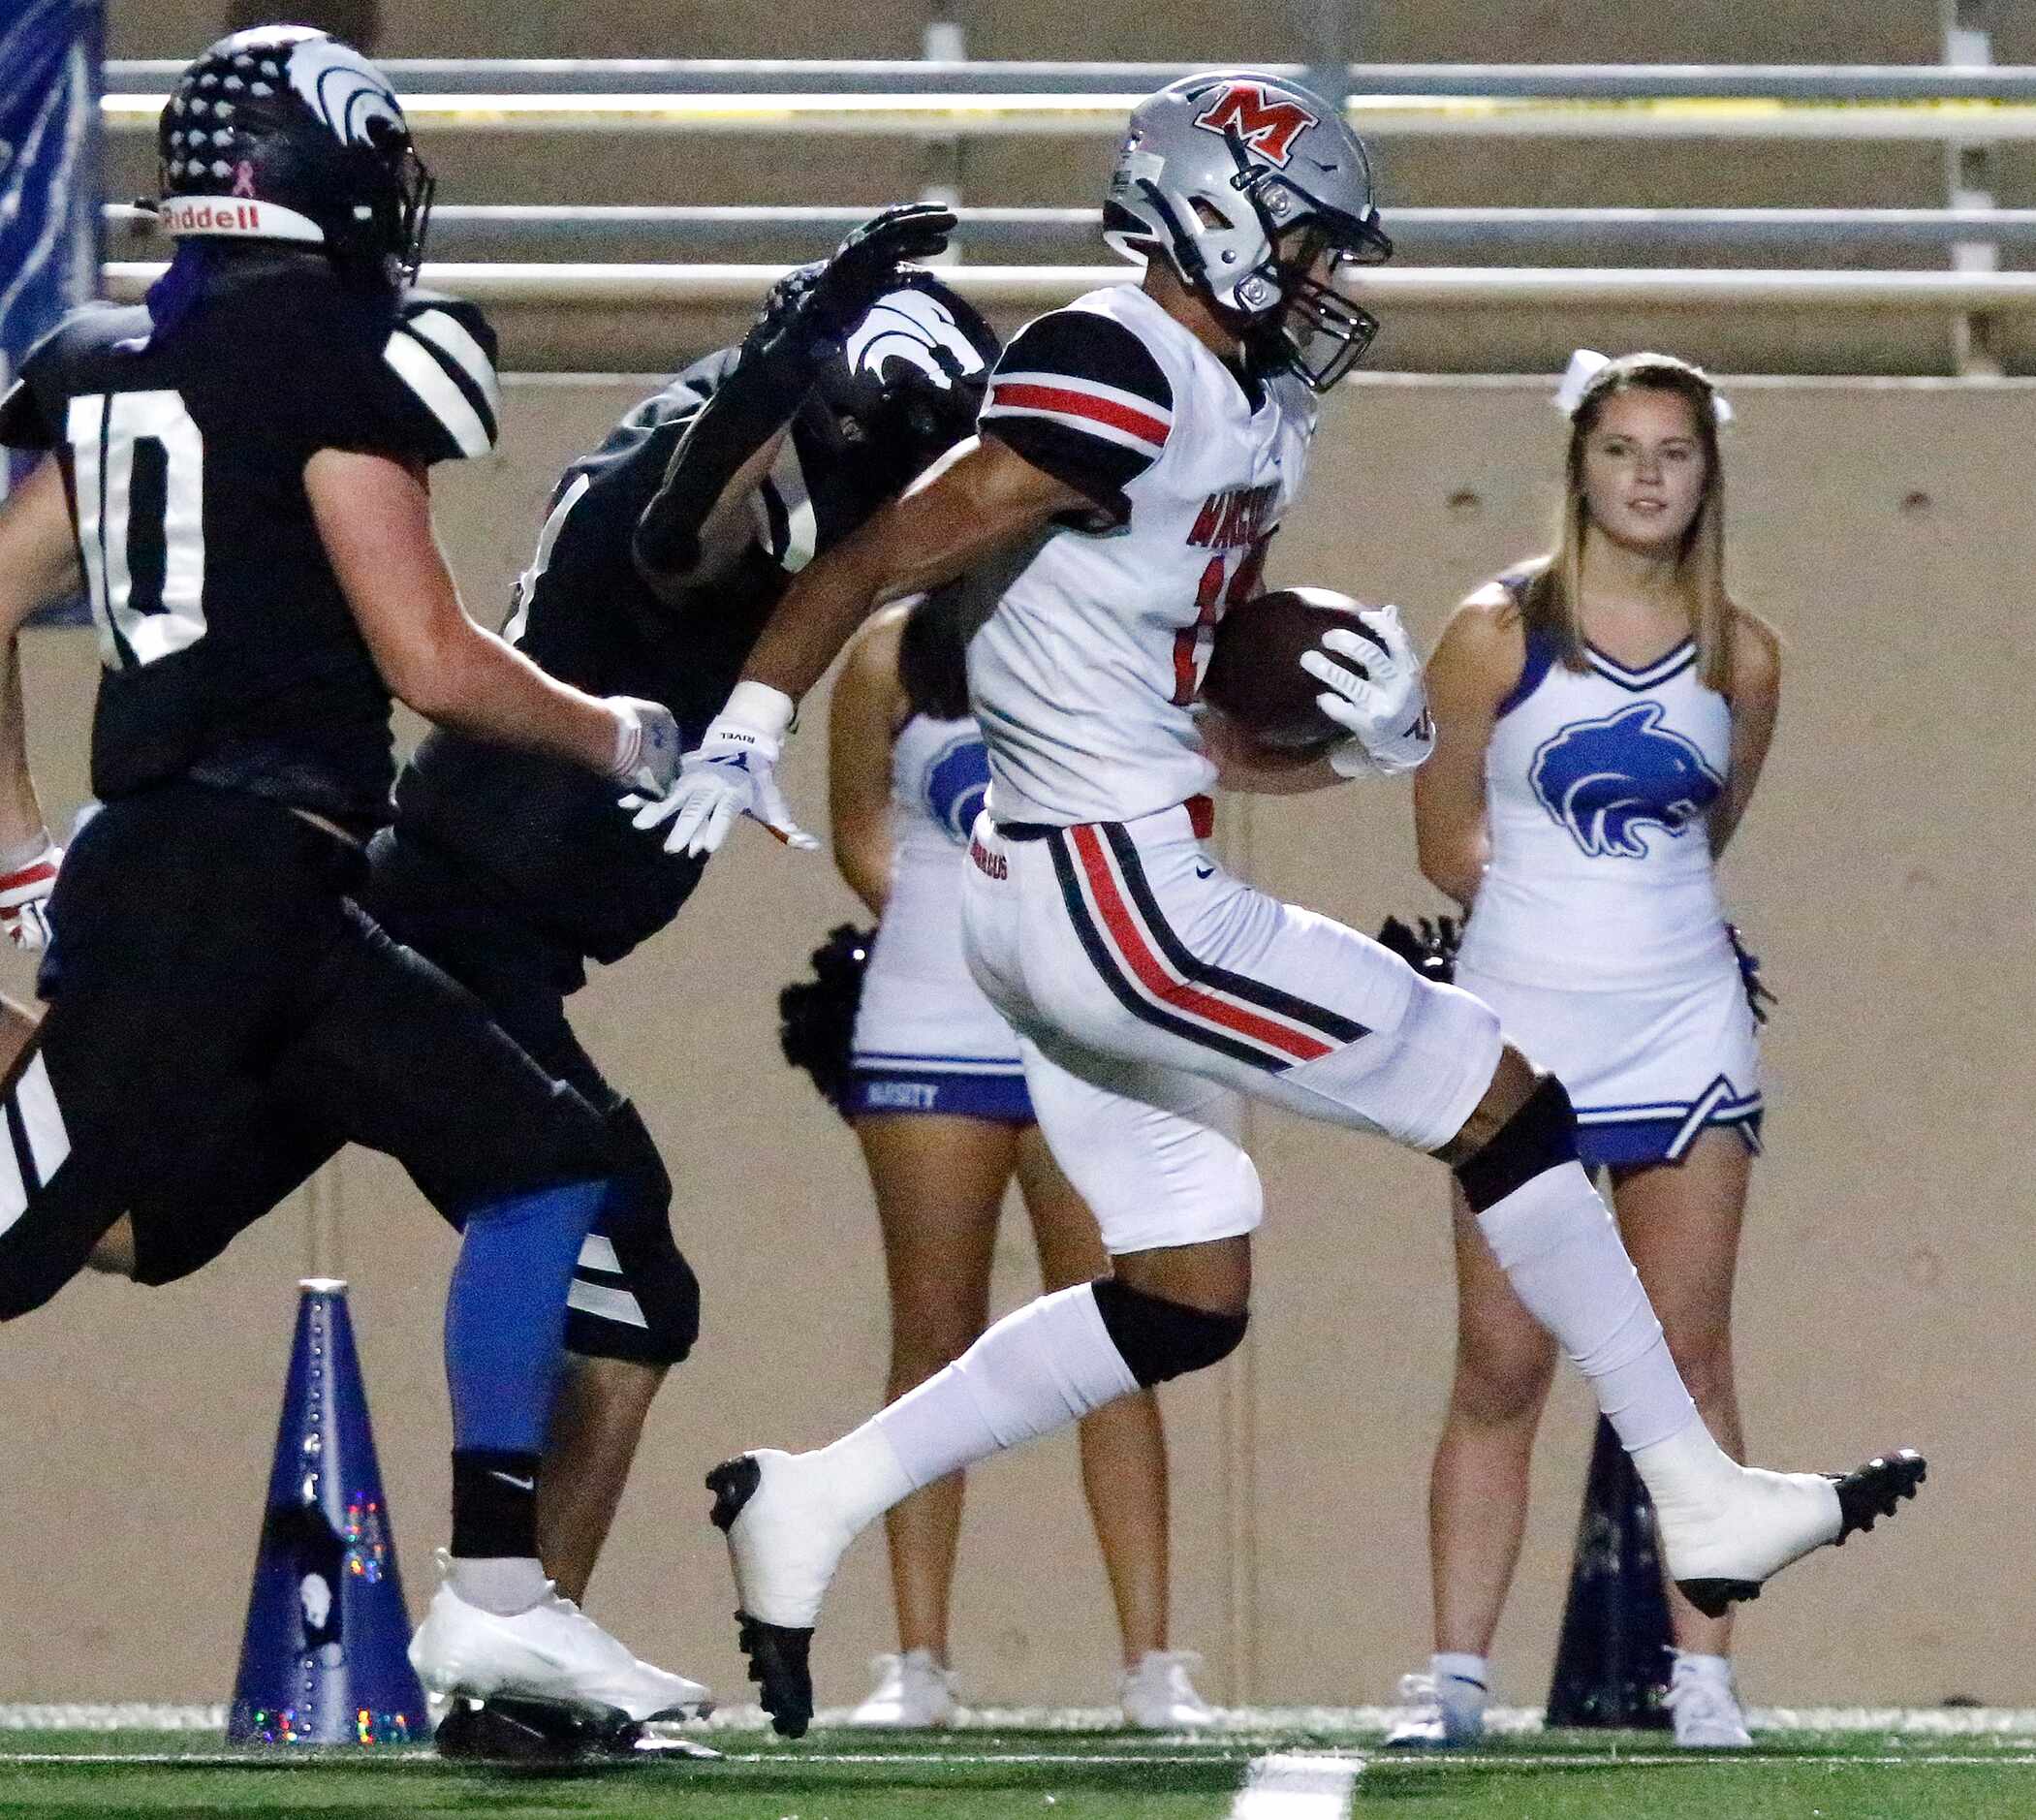 Flower Mound Marcus High School wide receiver Dallas Dudley (11) is chased down by Plano...